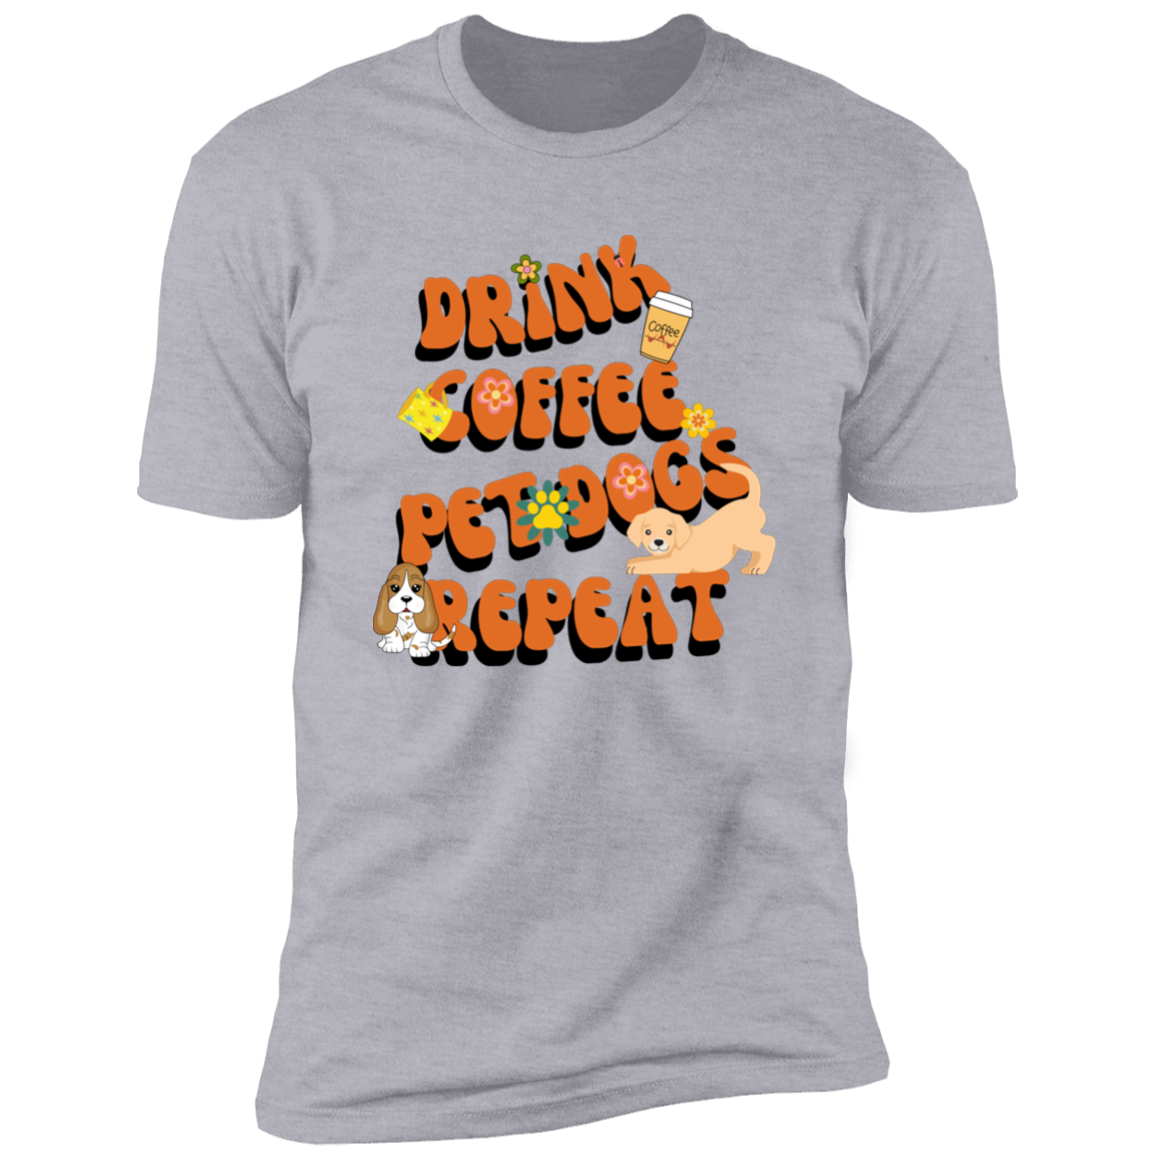 Drink Coffee Pet dogs repeat dog  Shirt, funny dog shirt for humans, dog mom and dog dad shirt, in light heather gray